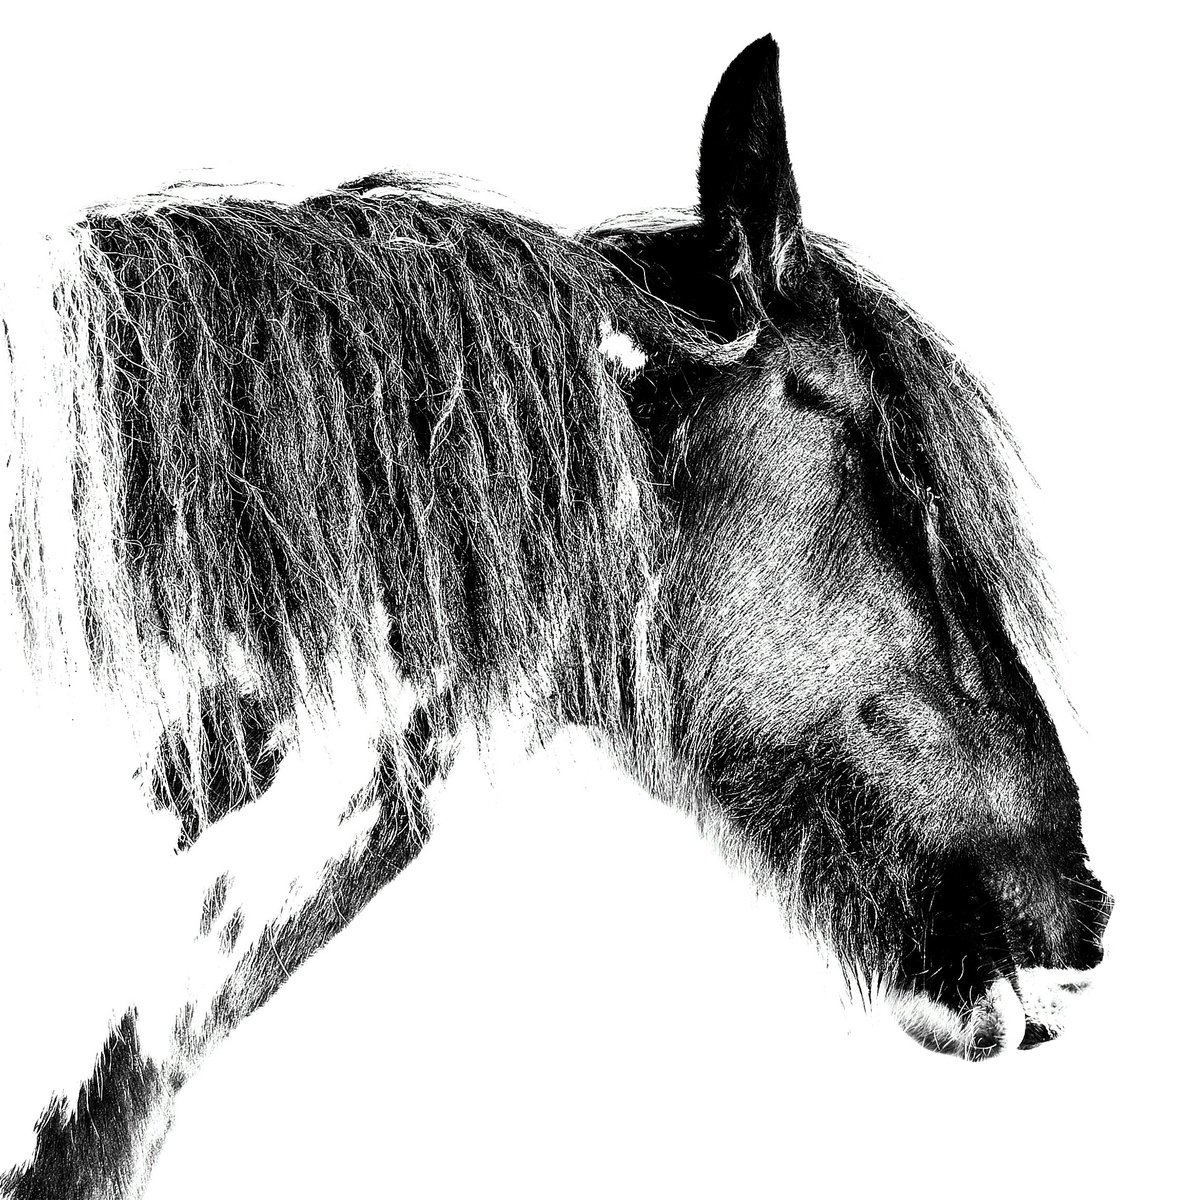 Horse, black and white portrait by oconnart